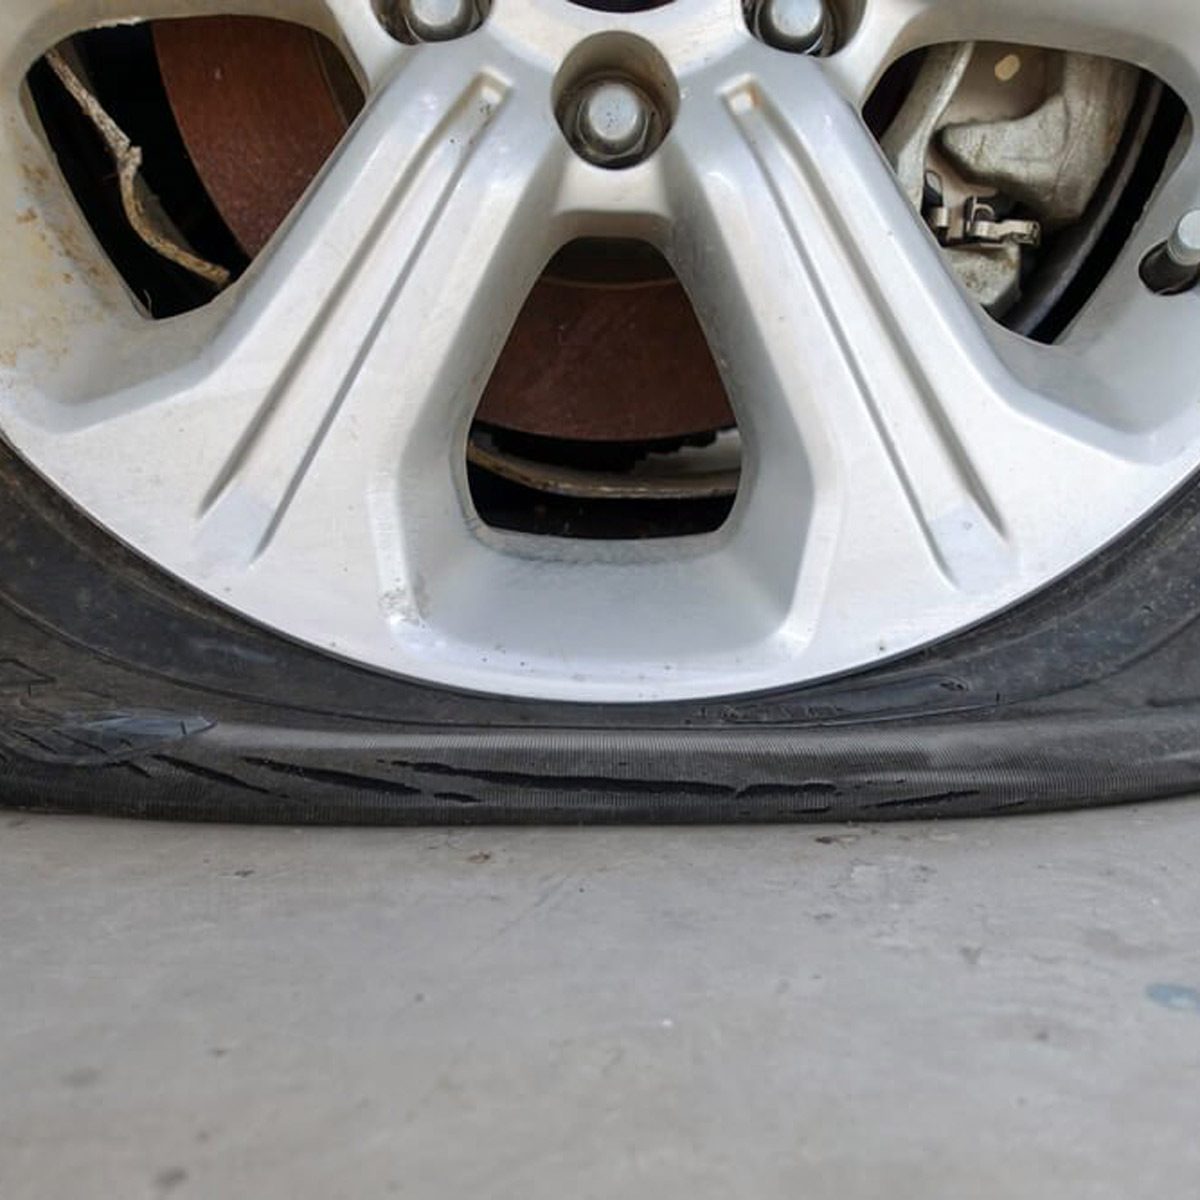 Why Does My Tire Keep Going Flat?